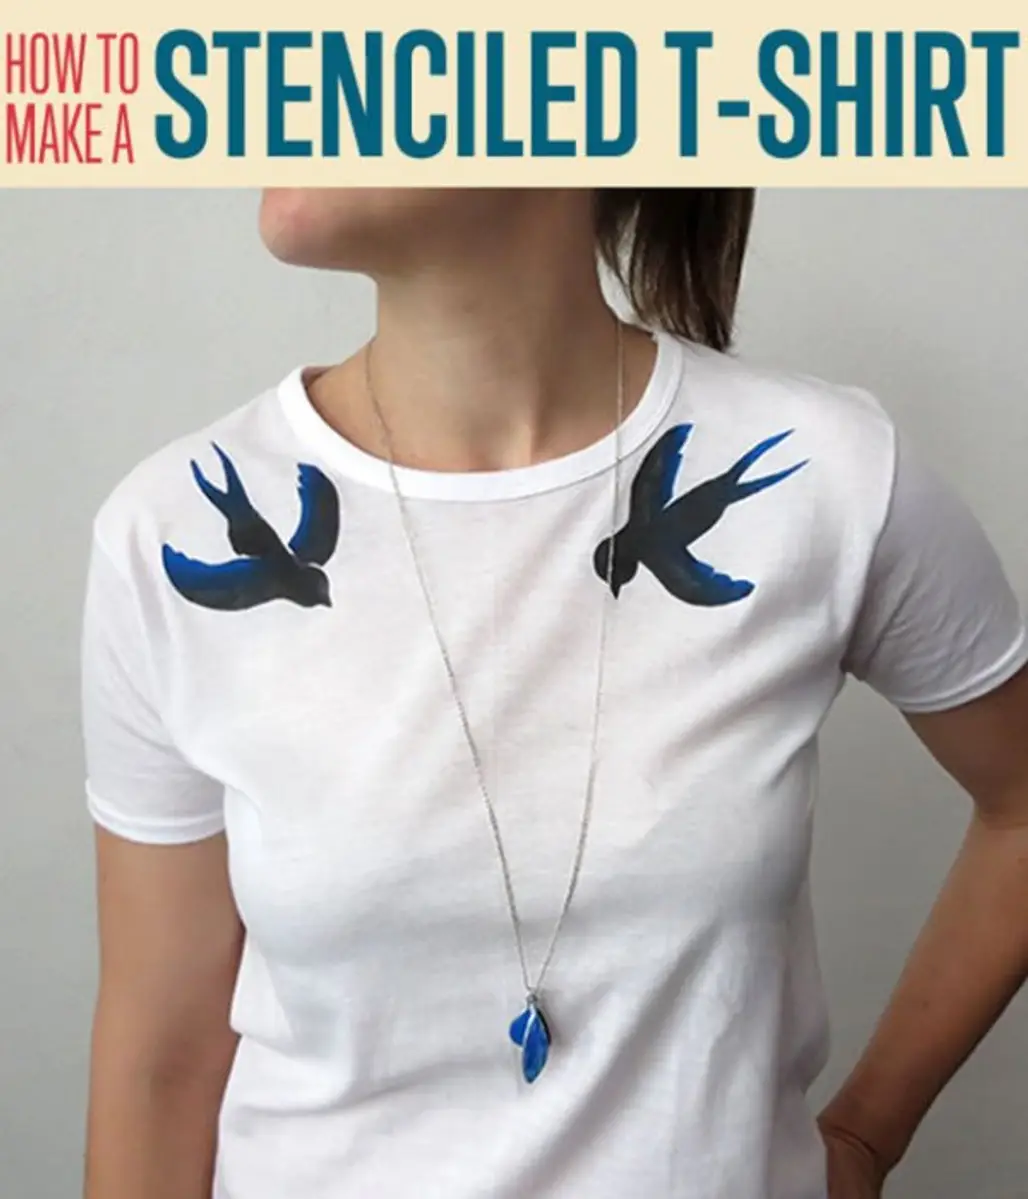 How to Make a Stenciled Shirt